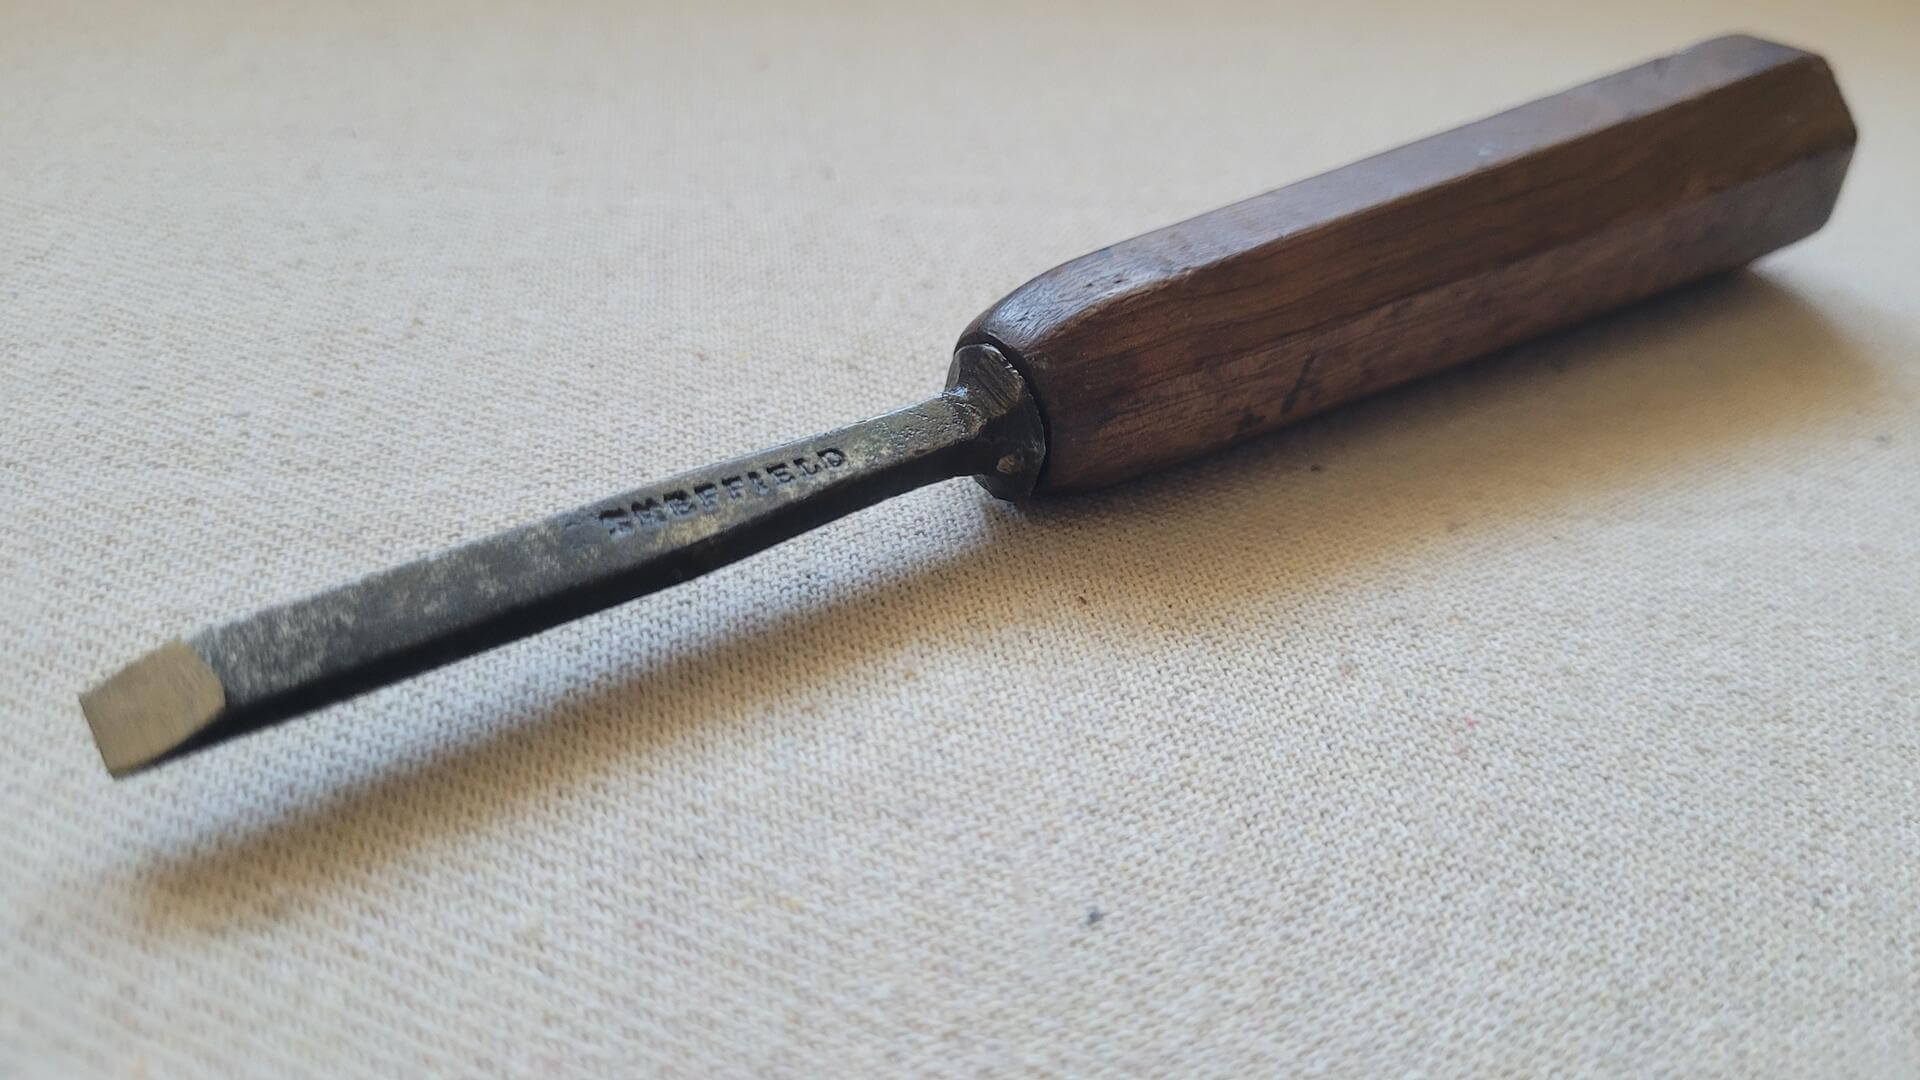 Rare vintage cast steel carving chisel 1/4 inch with hexagonal wooden handle by I. Herring & Sons from Sheffield. Antique made in England collectible woodworking and carpentry hand tool